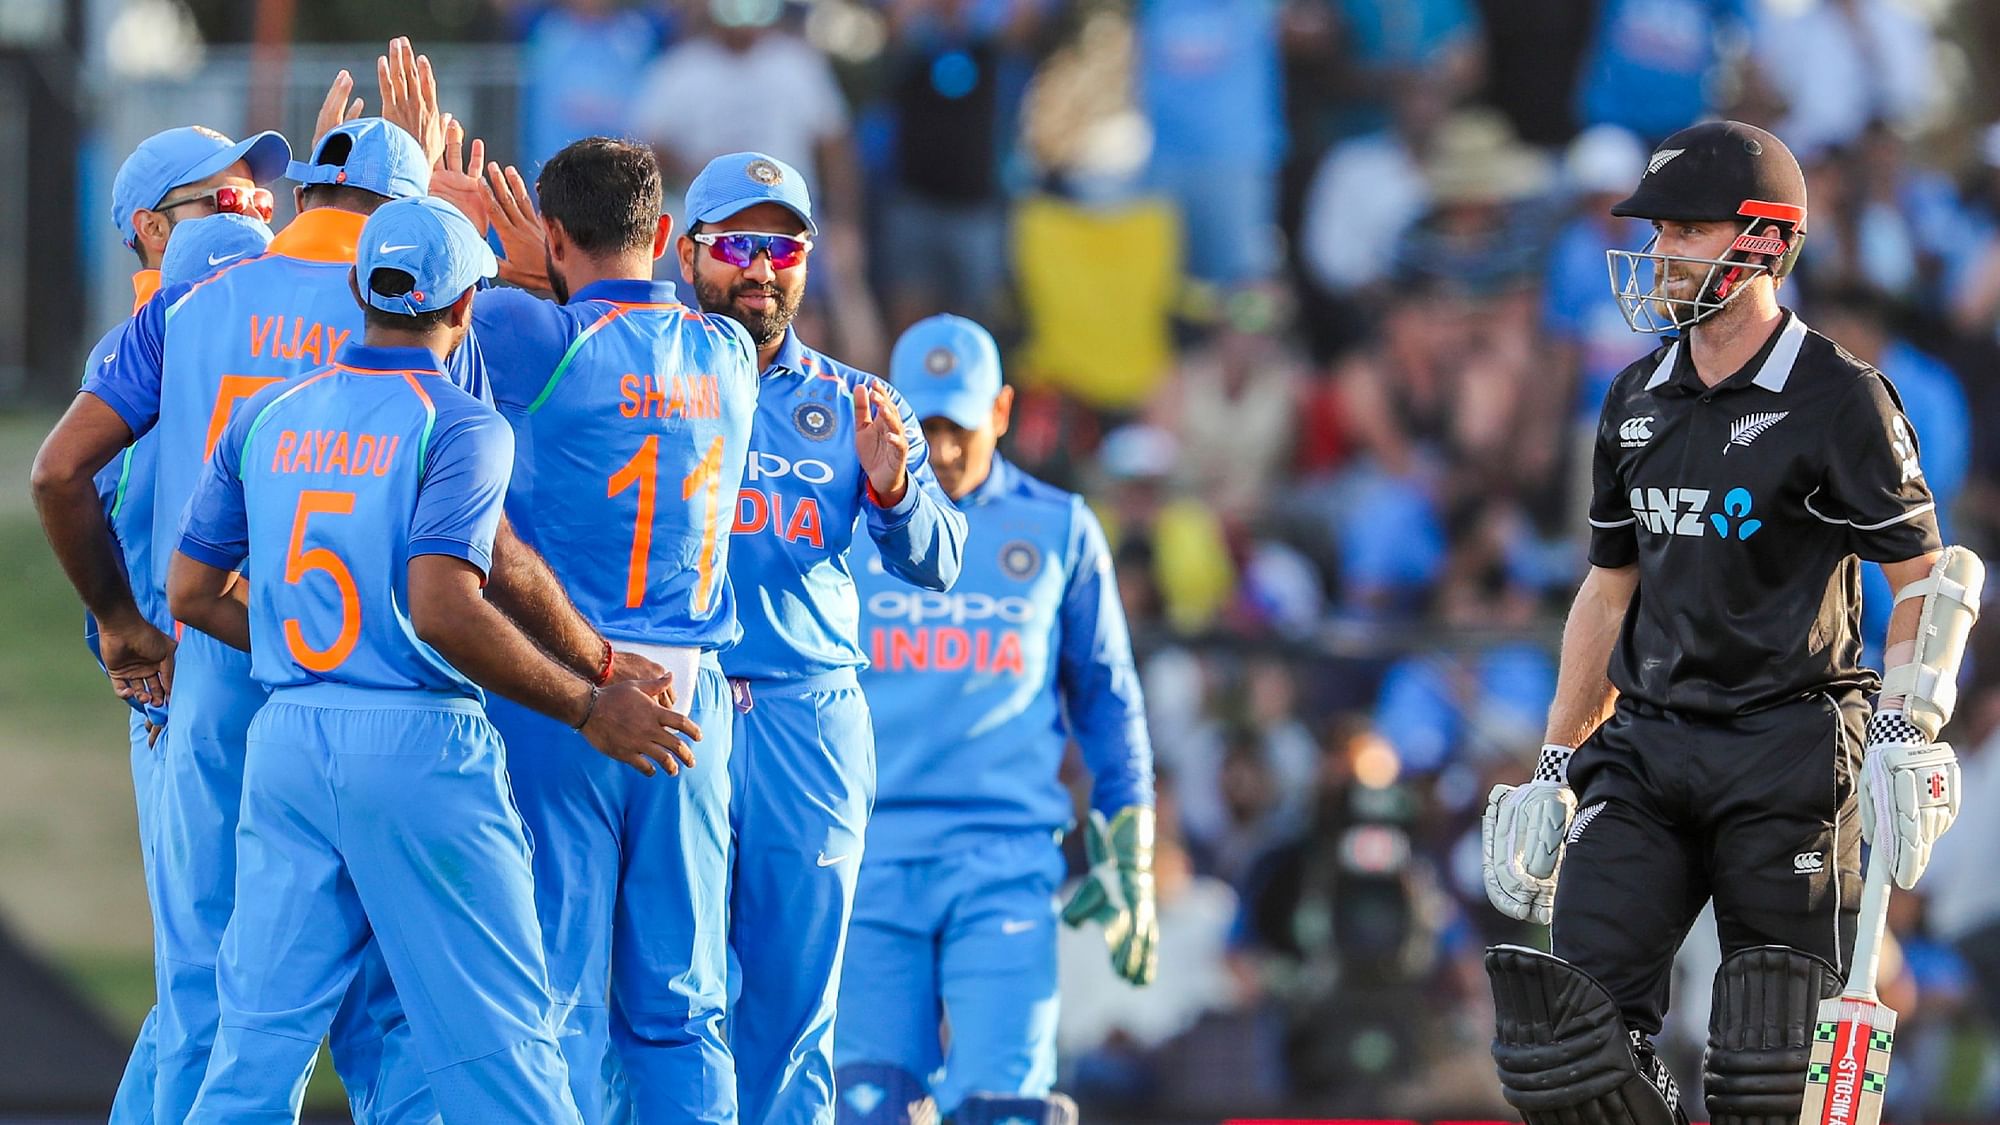 India beat New Zealand by 90 runs in the second ODI on Saturday.